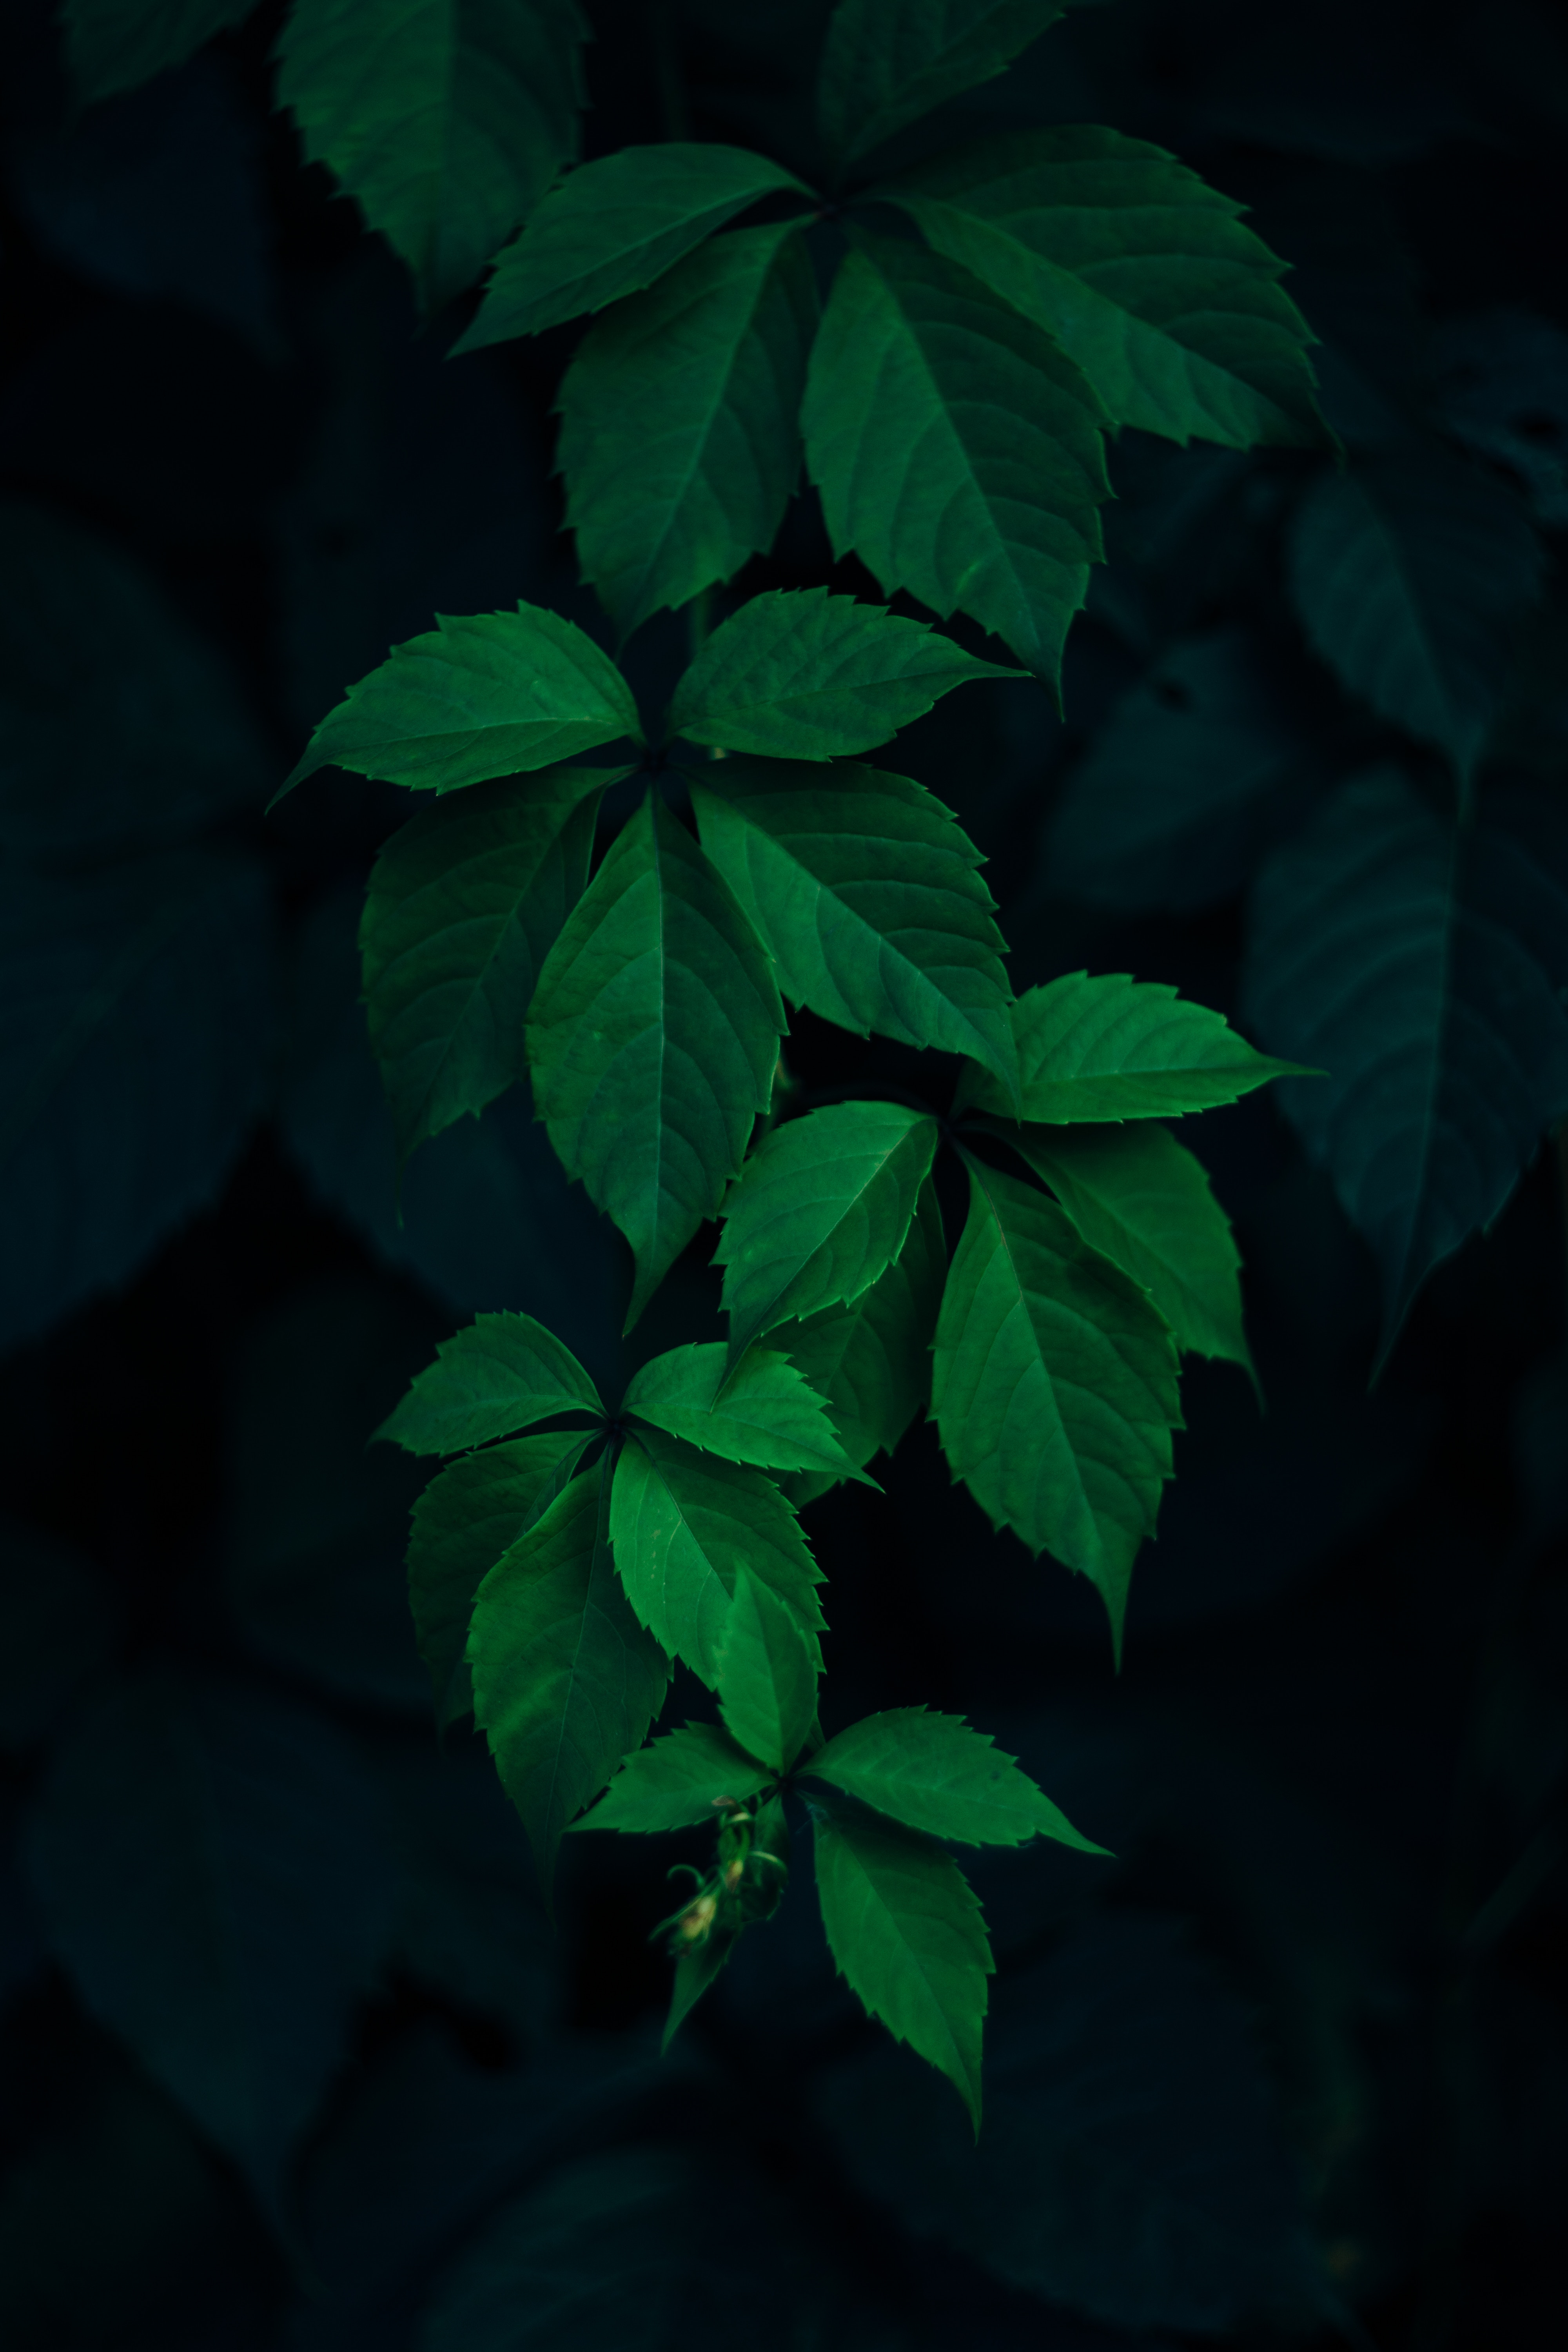 leaves, branches, nature, green, dark background